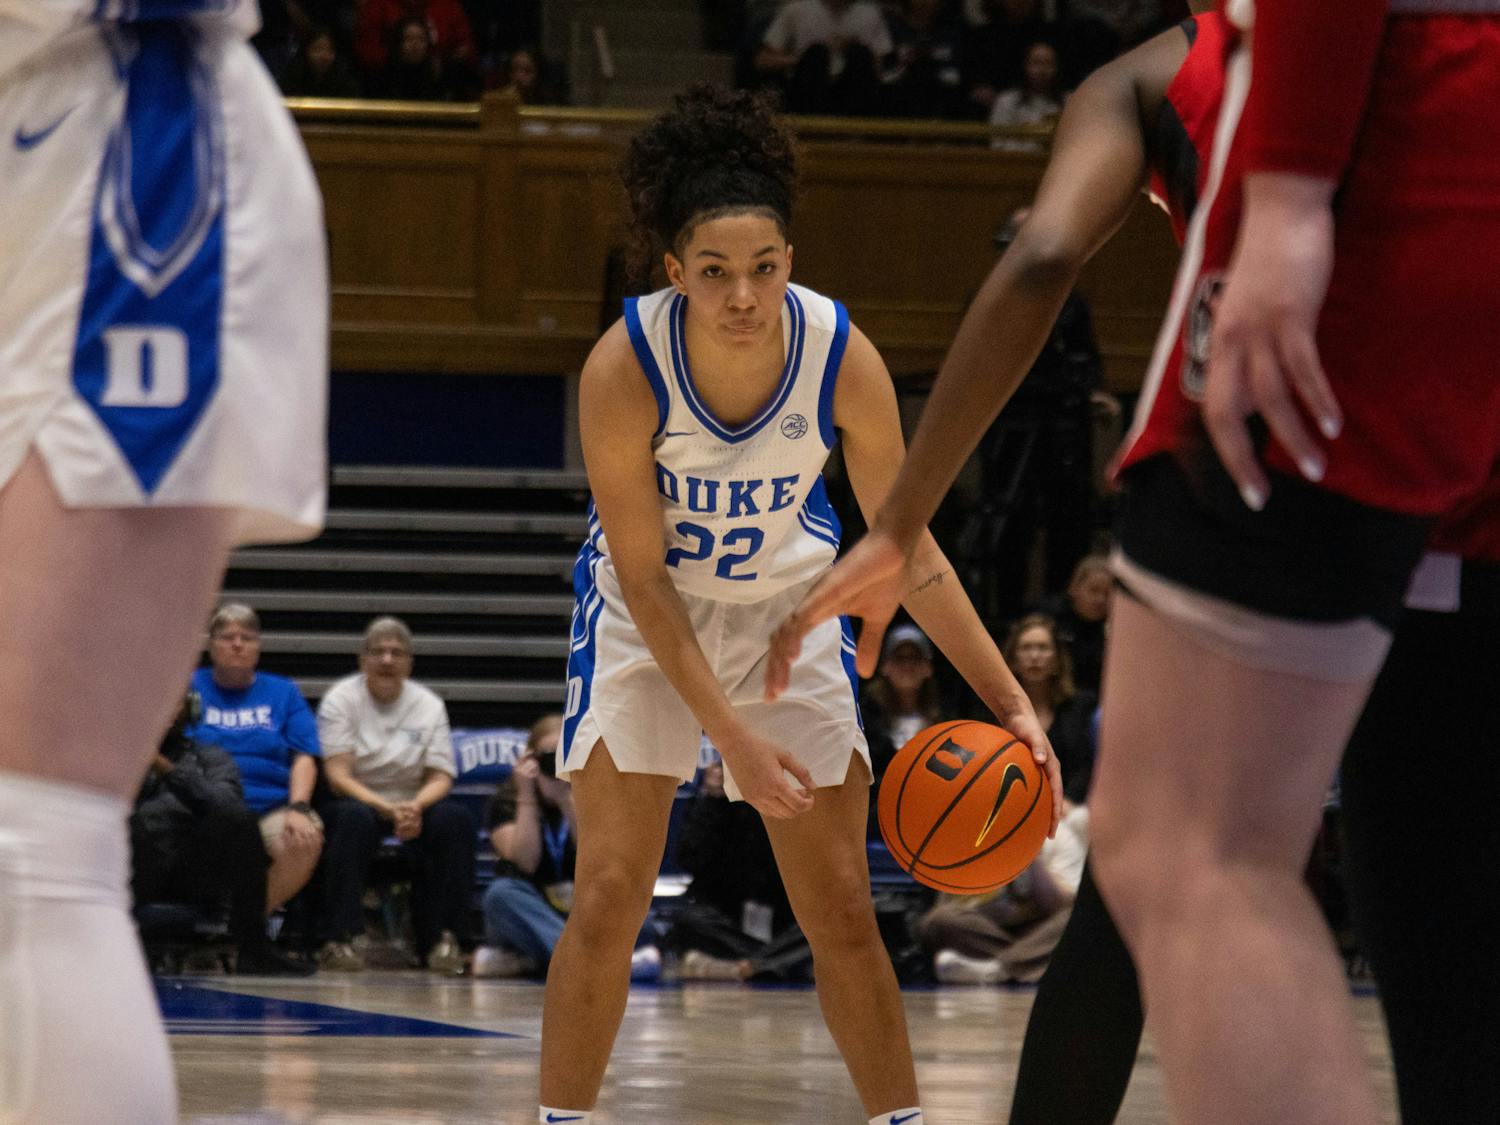 Taina Mair stares down the defense during Duke's win against N.C. State.